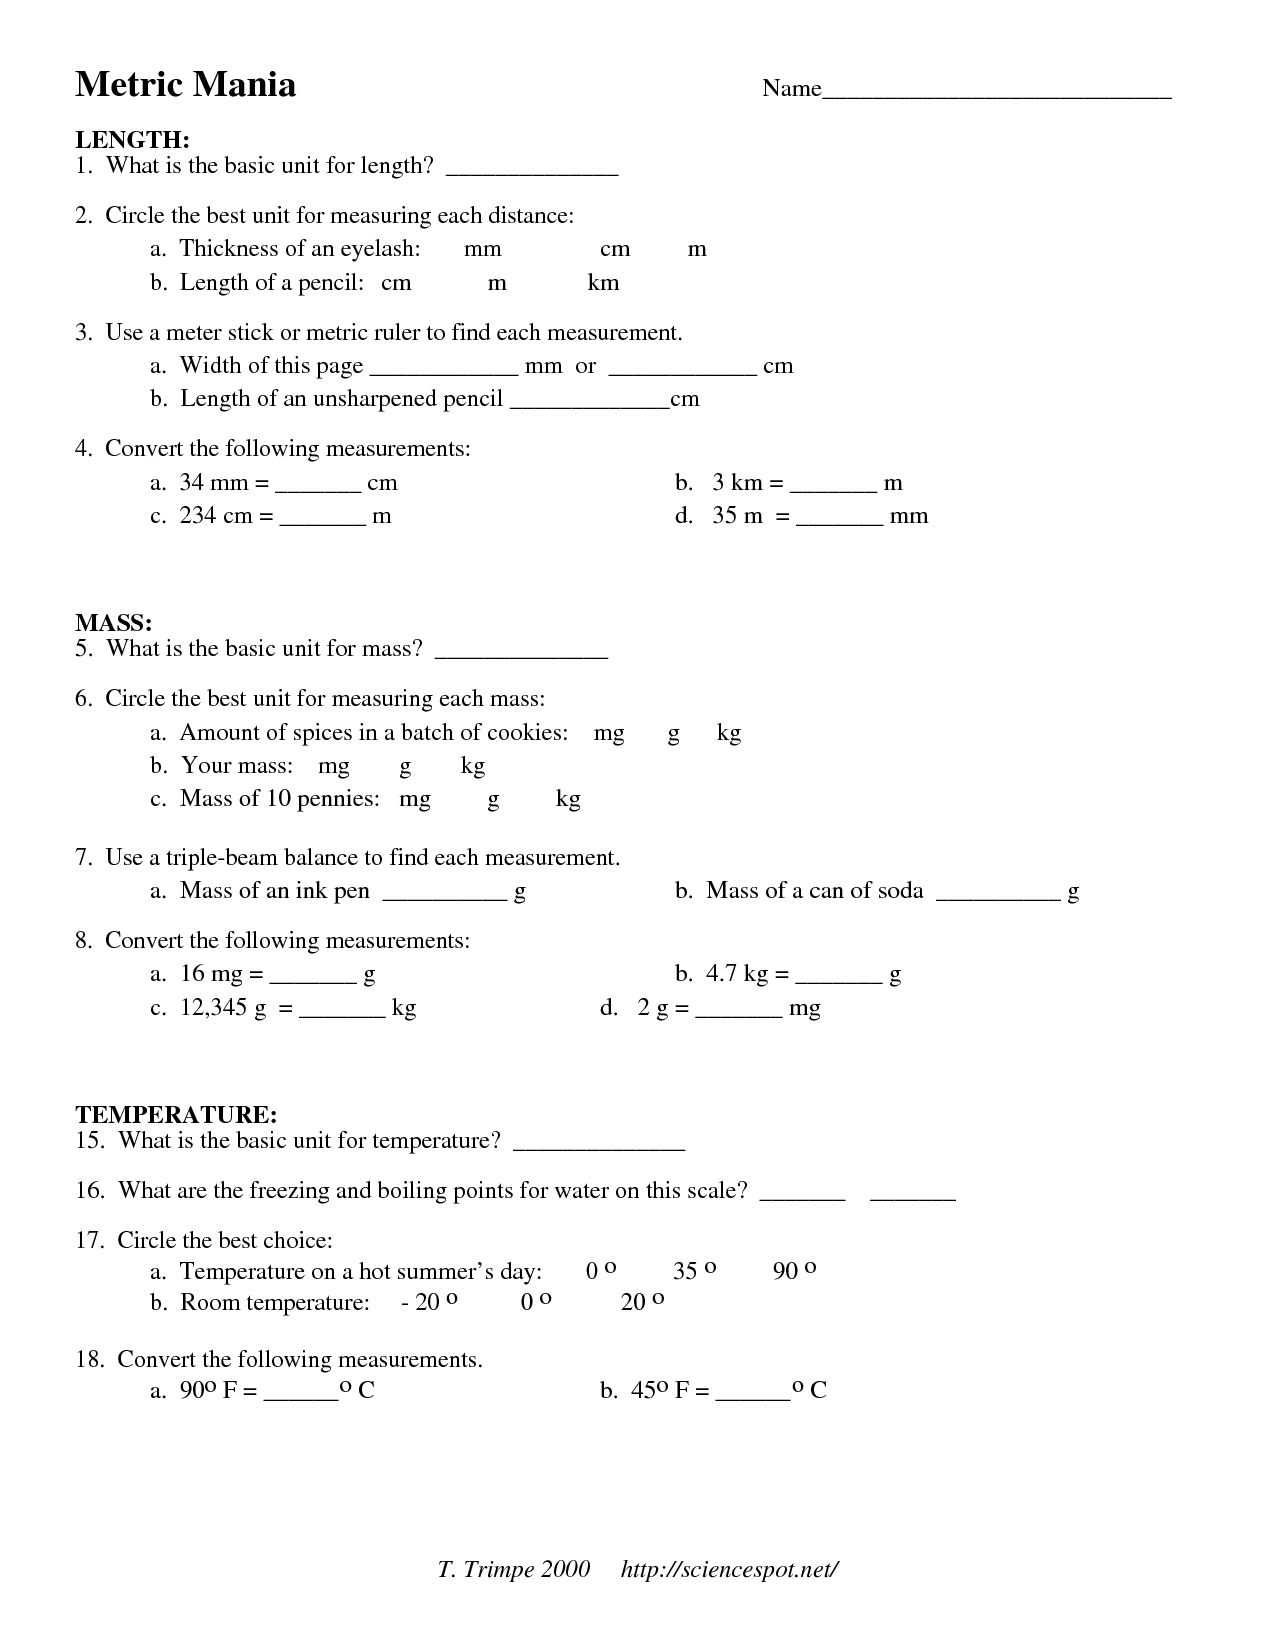 16 Best Images of Mineral Mania Worksheet Answers To  Mineral Mania Worksheet Answer Key 